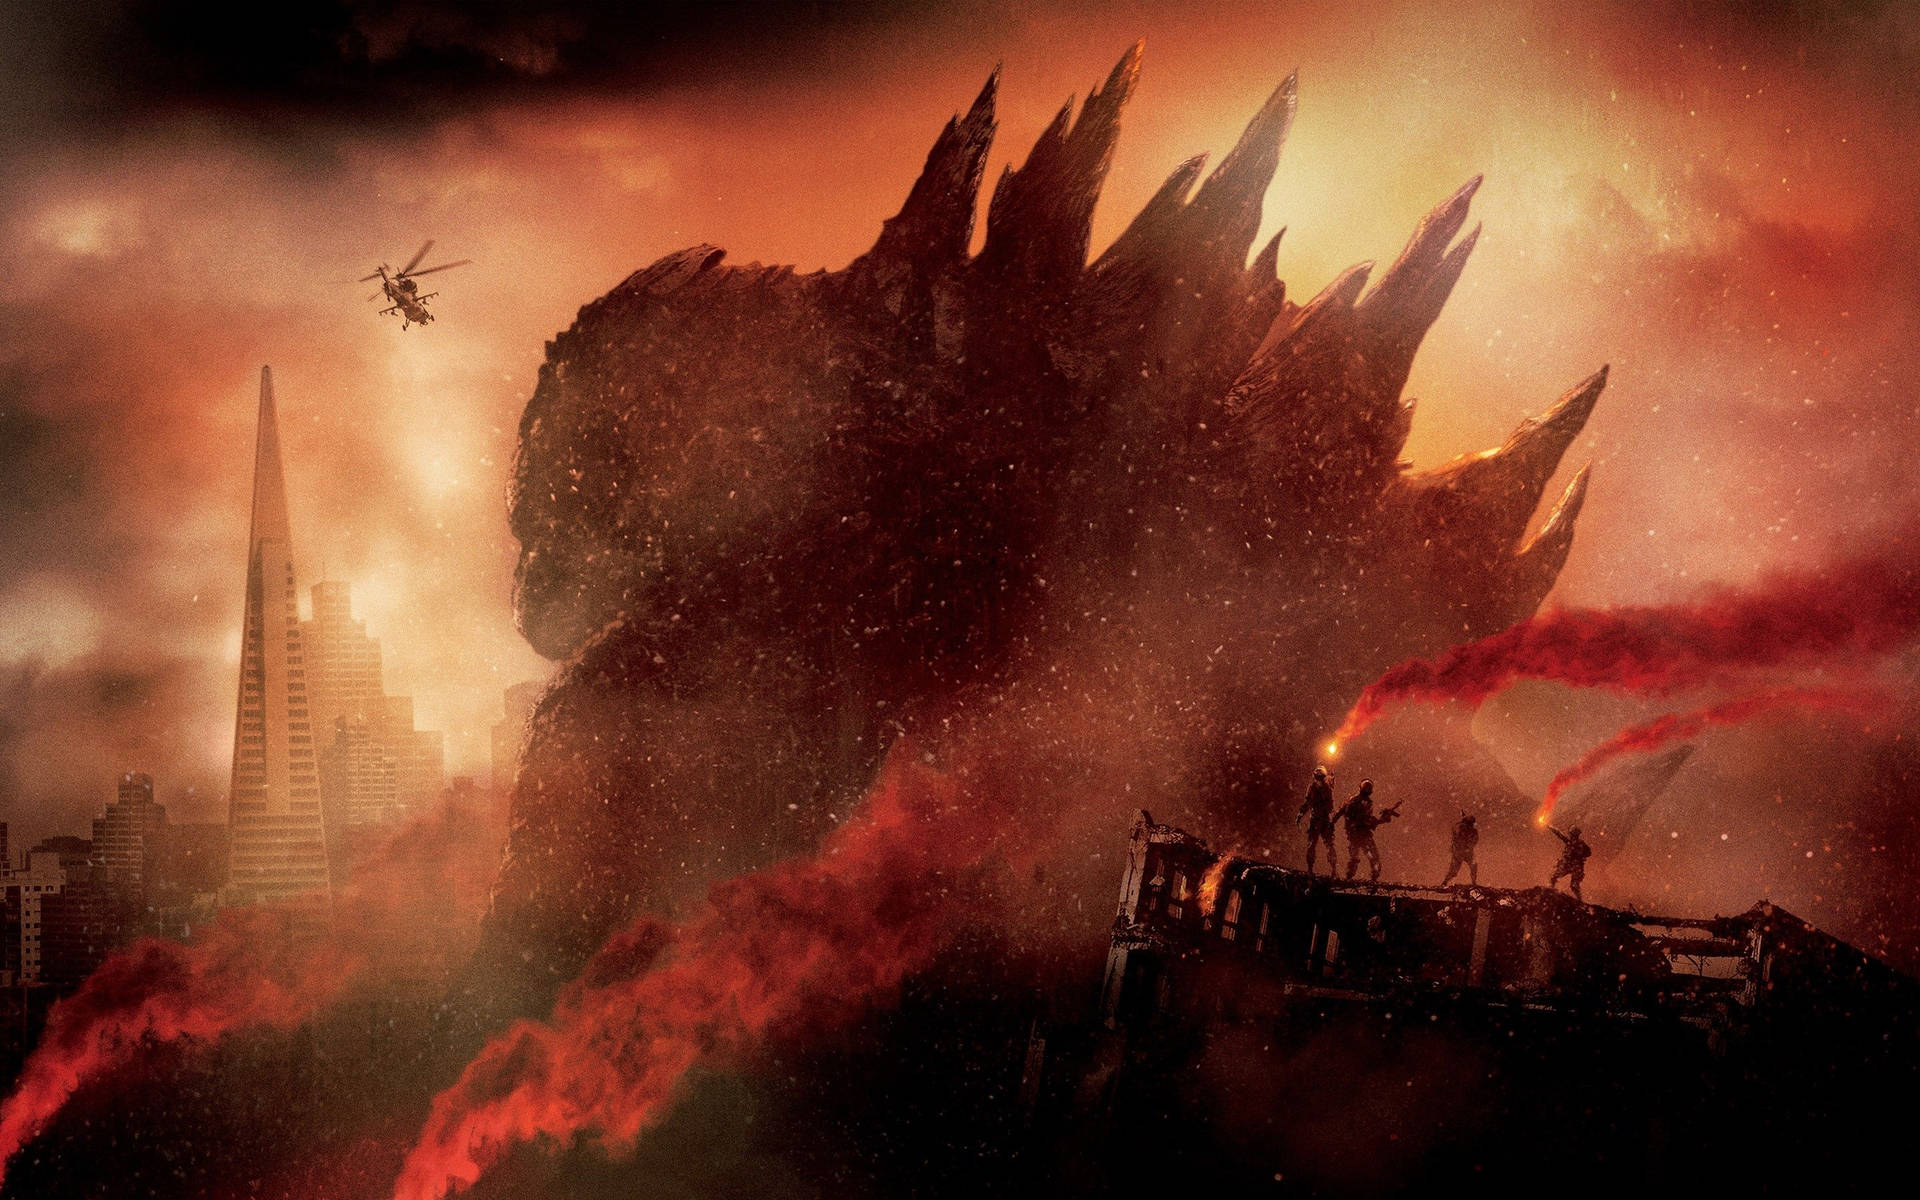 Godzilla faces destruction in the midst of a raging inferno. Wallpaper